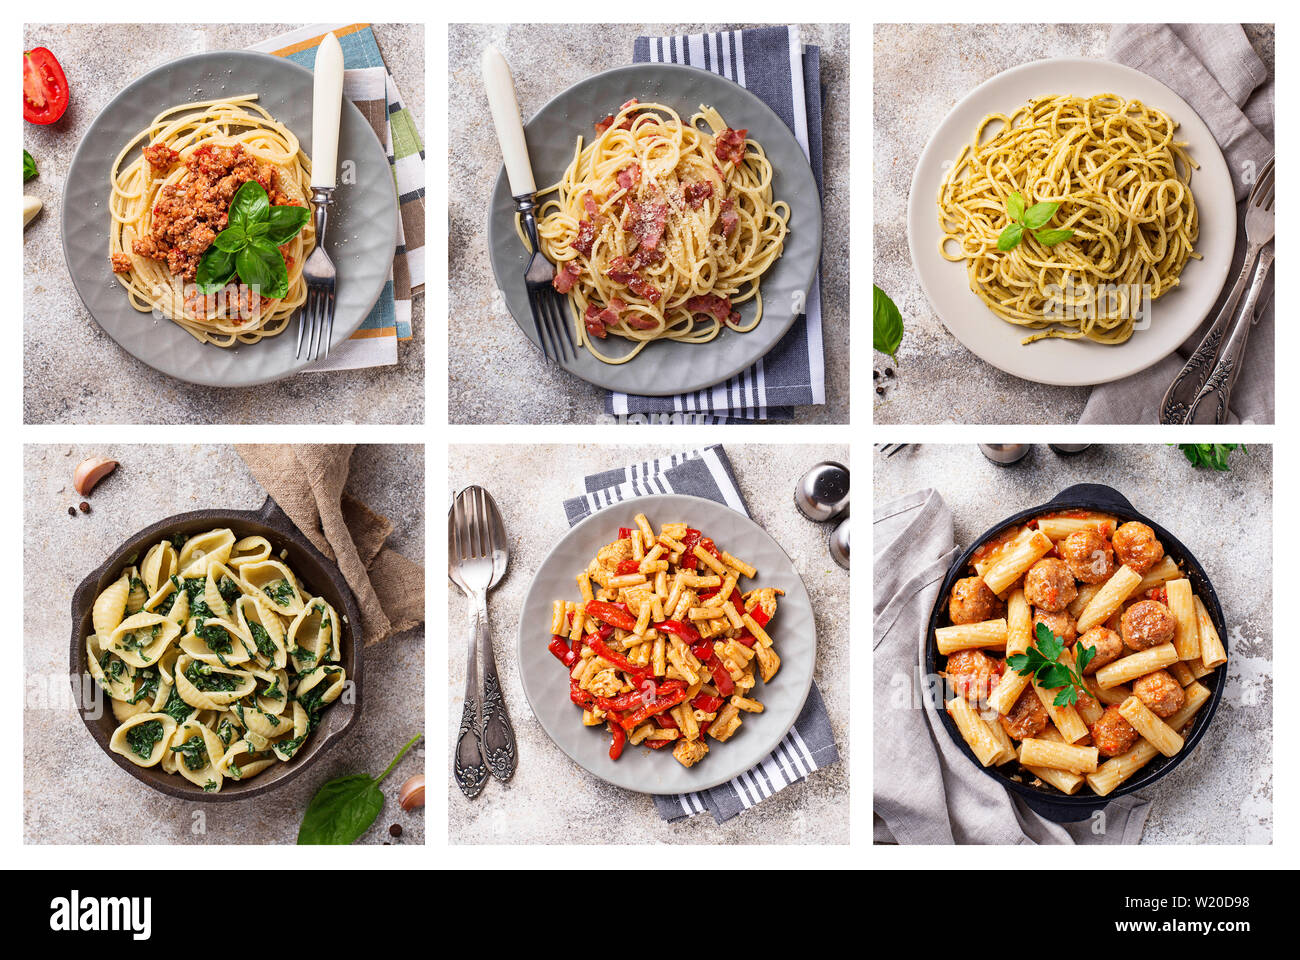 Collage with different pasta dish Stock Photo